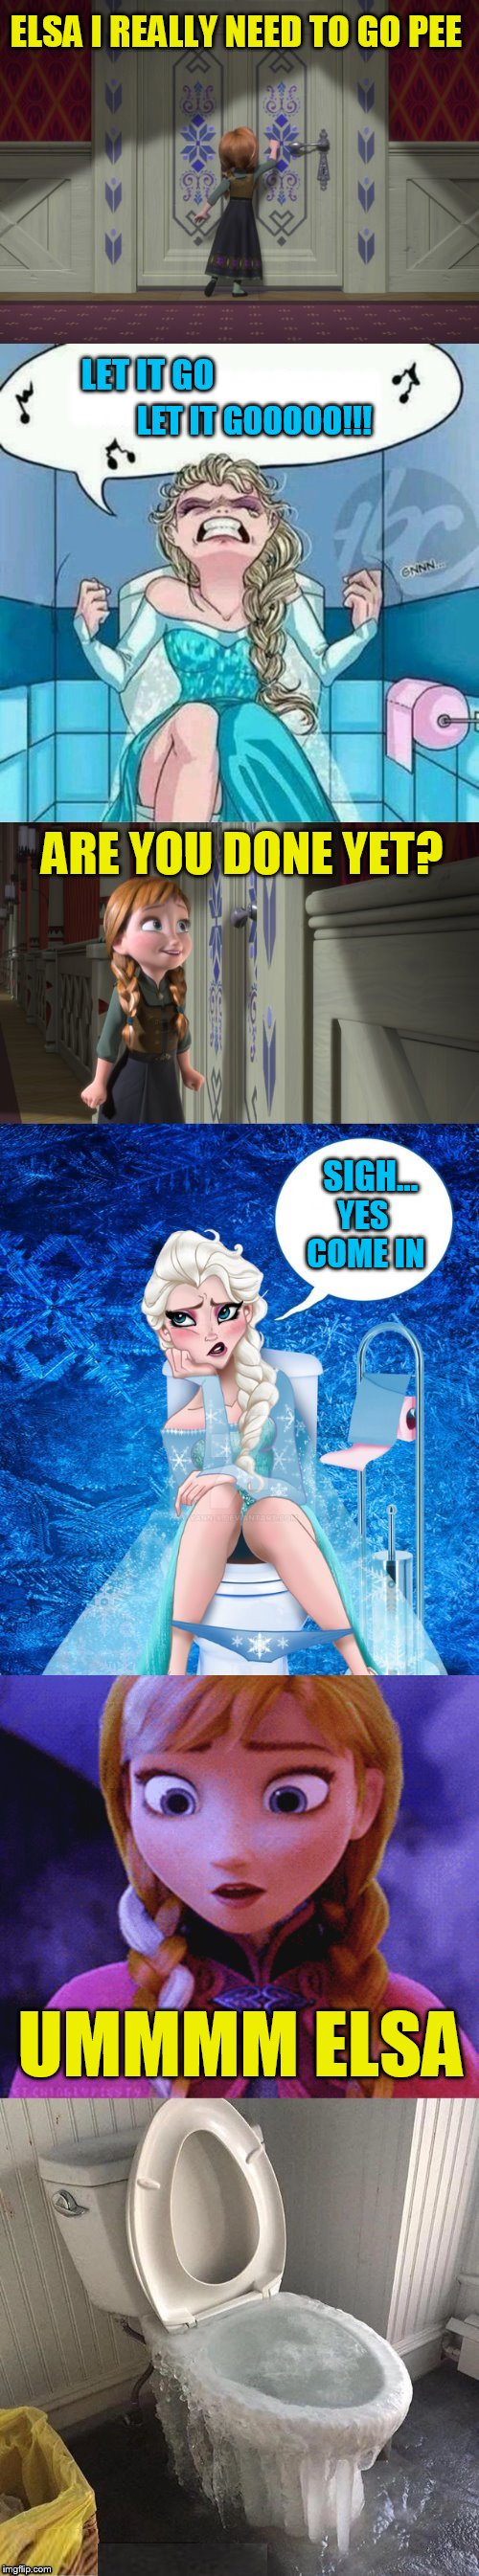 Frozen Memes | ELSA I REALLY NEED TO GO PEE; LET IT GO; LET IT GOOOOO!!! ARE YOU DONE YET? SIGH... YES COME IN; UMMMM ELSA | image tagged in memes,frozen,elsa,elsa frozen,anna,i need to pee | made w/ Imgflip meme maker